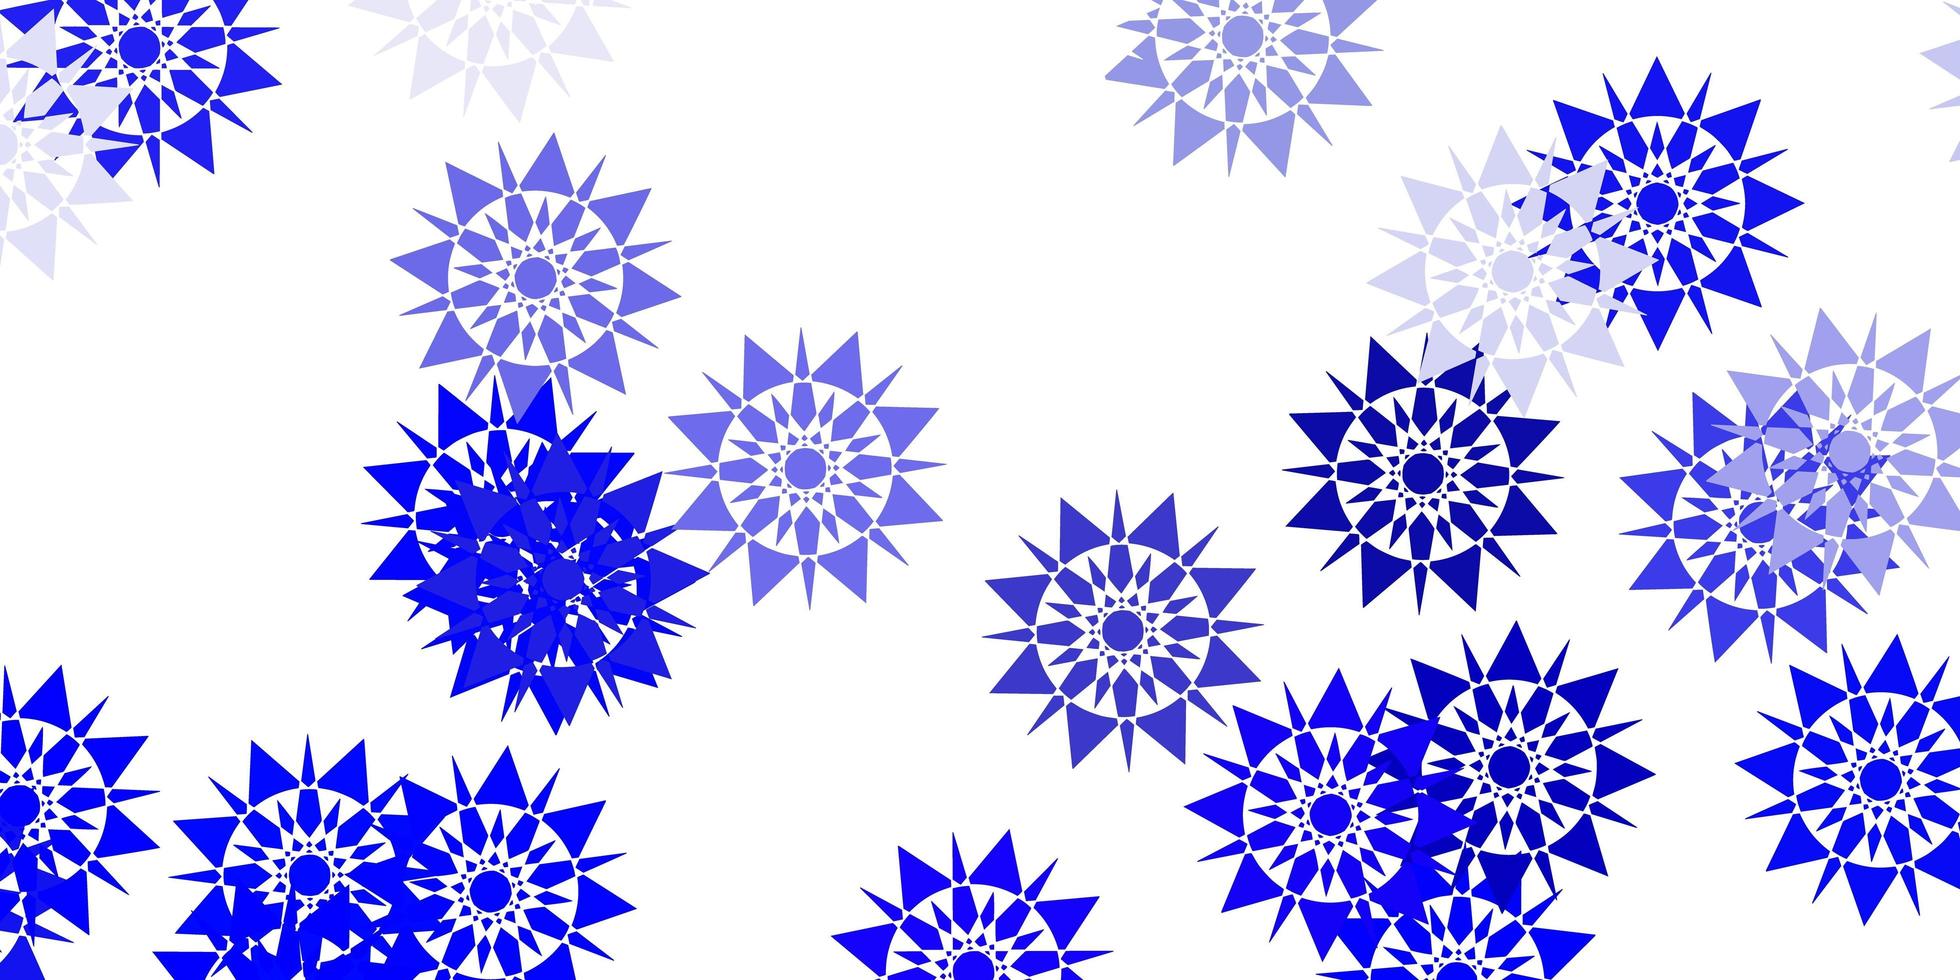 Light blue pattern with colored snowflakes. vector